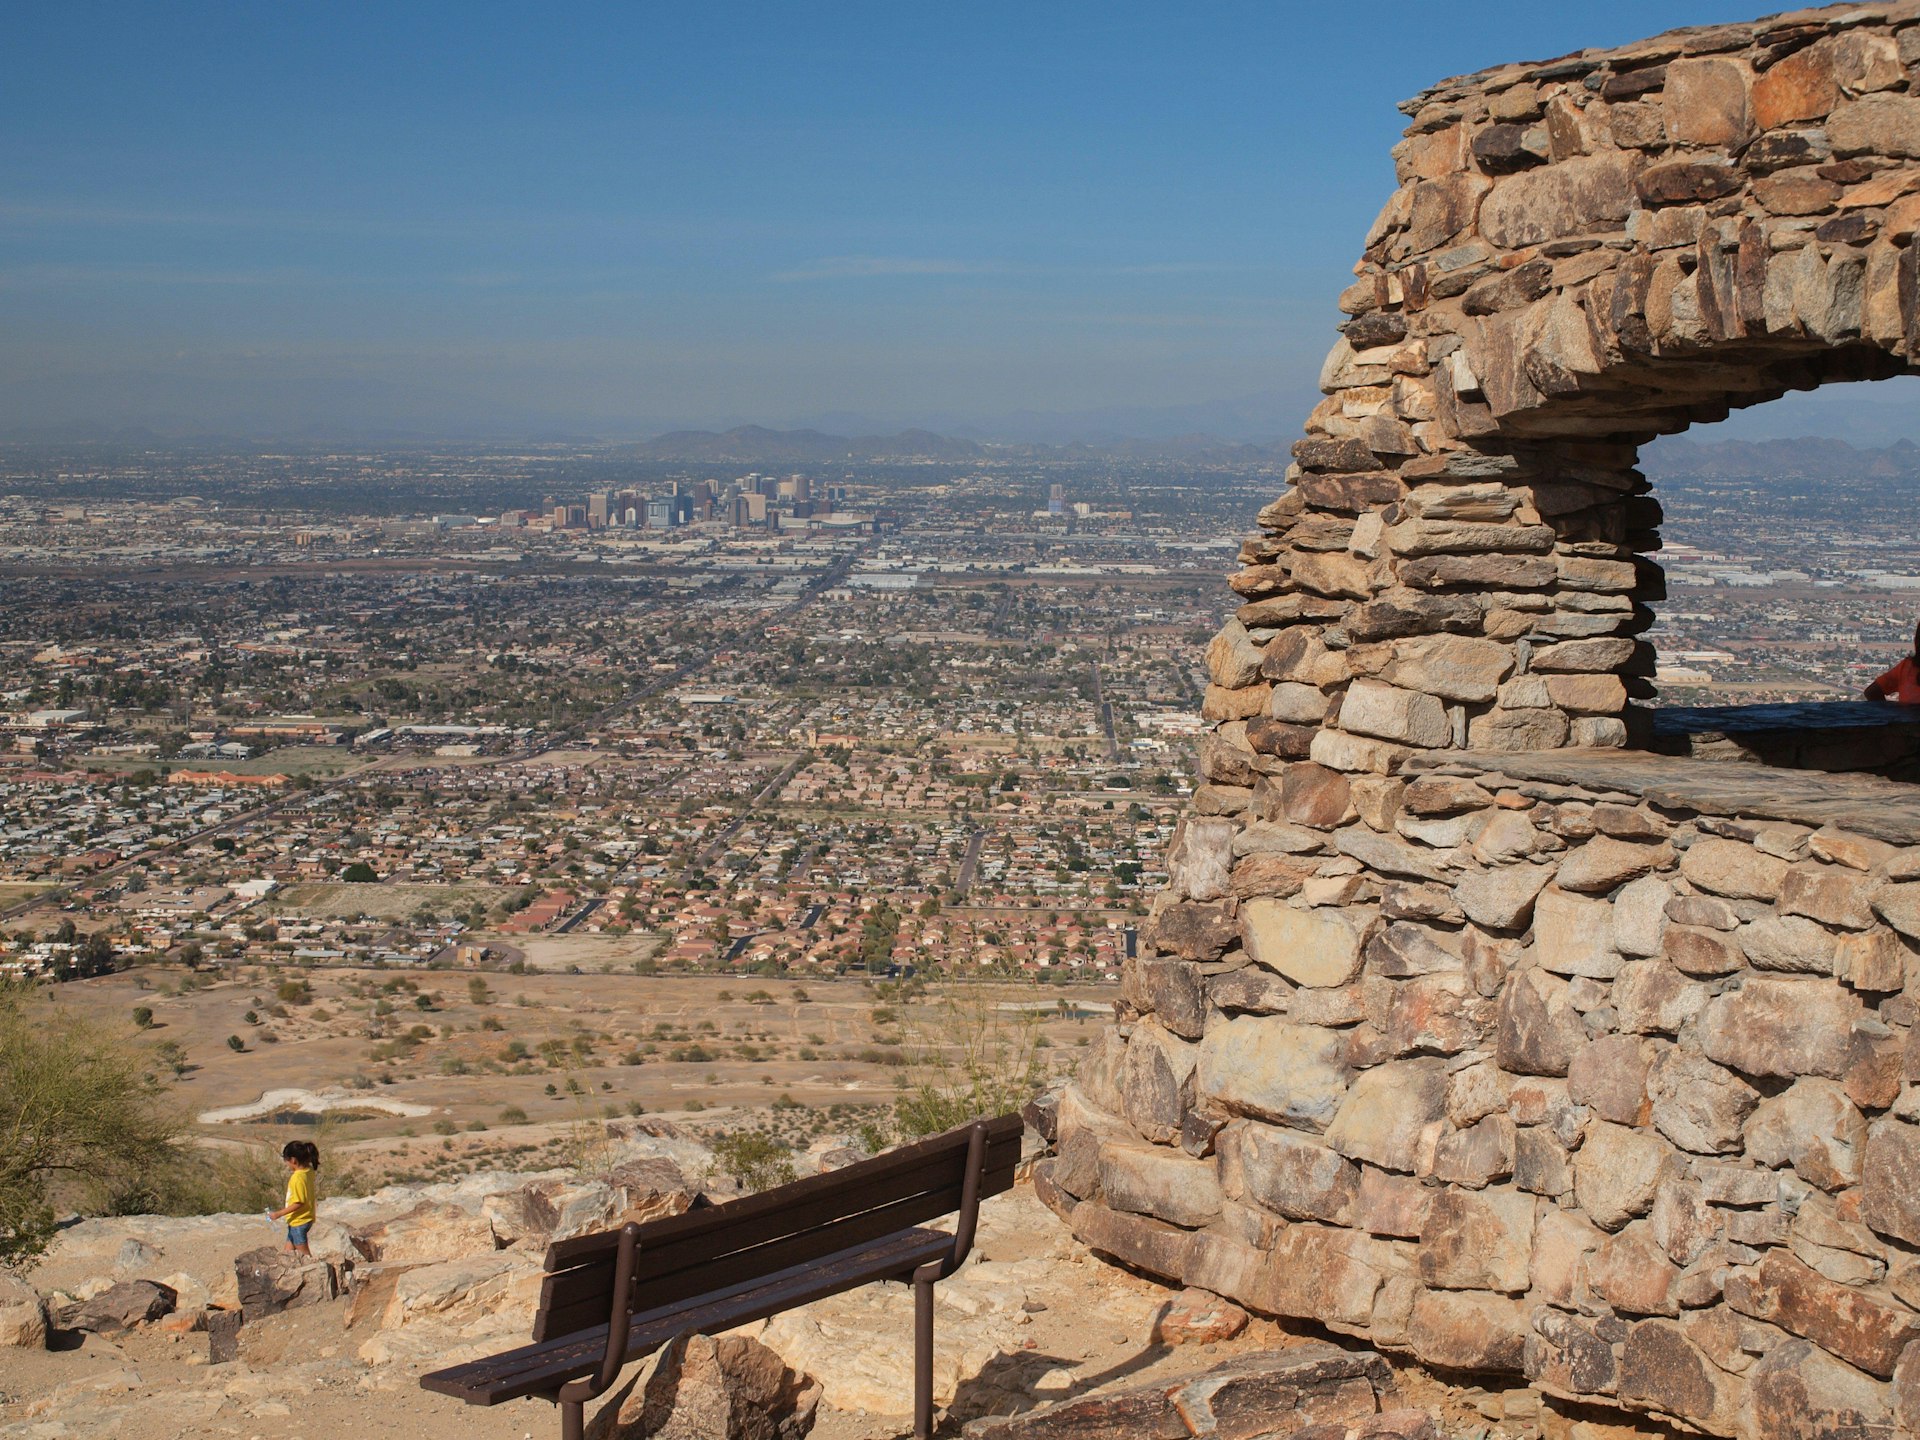 A bench at South Mountain Park offers a lookout onto the Phoenix skyline and desert in the distance